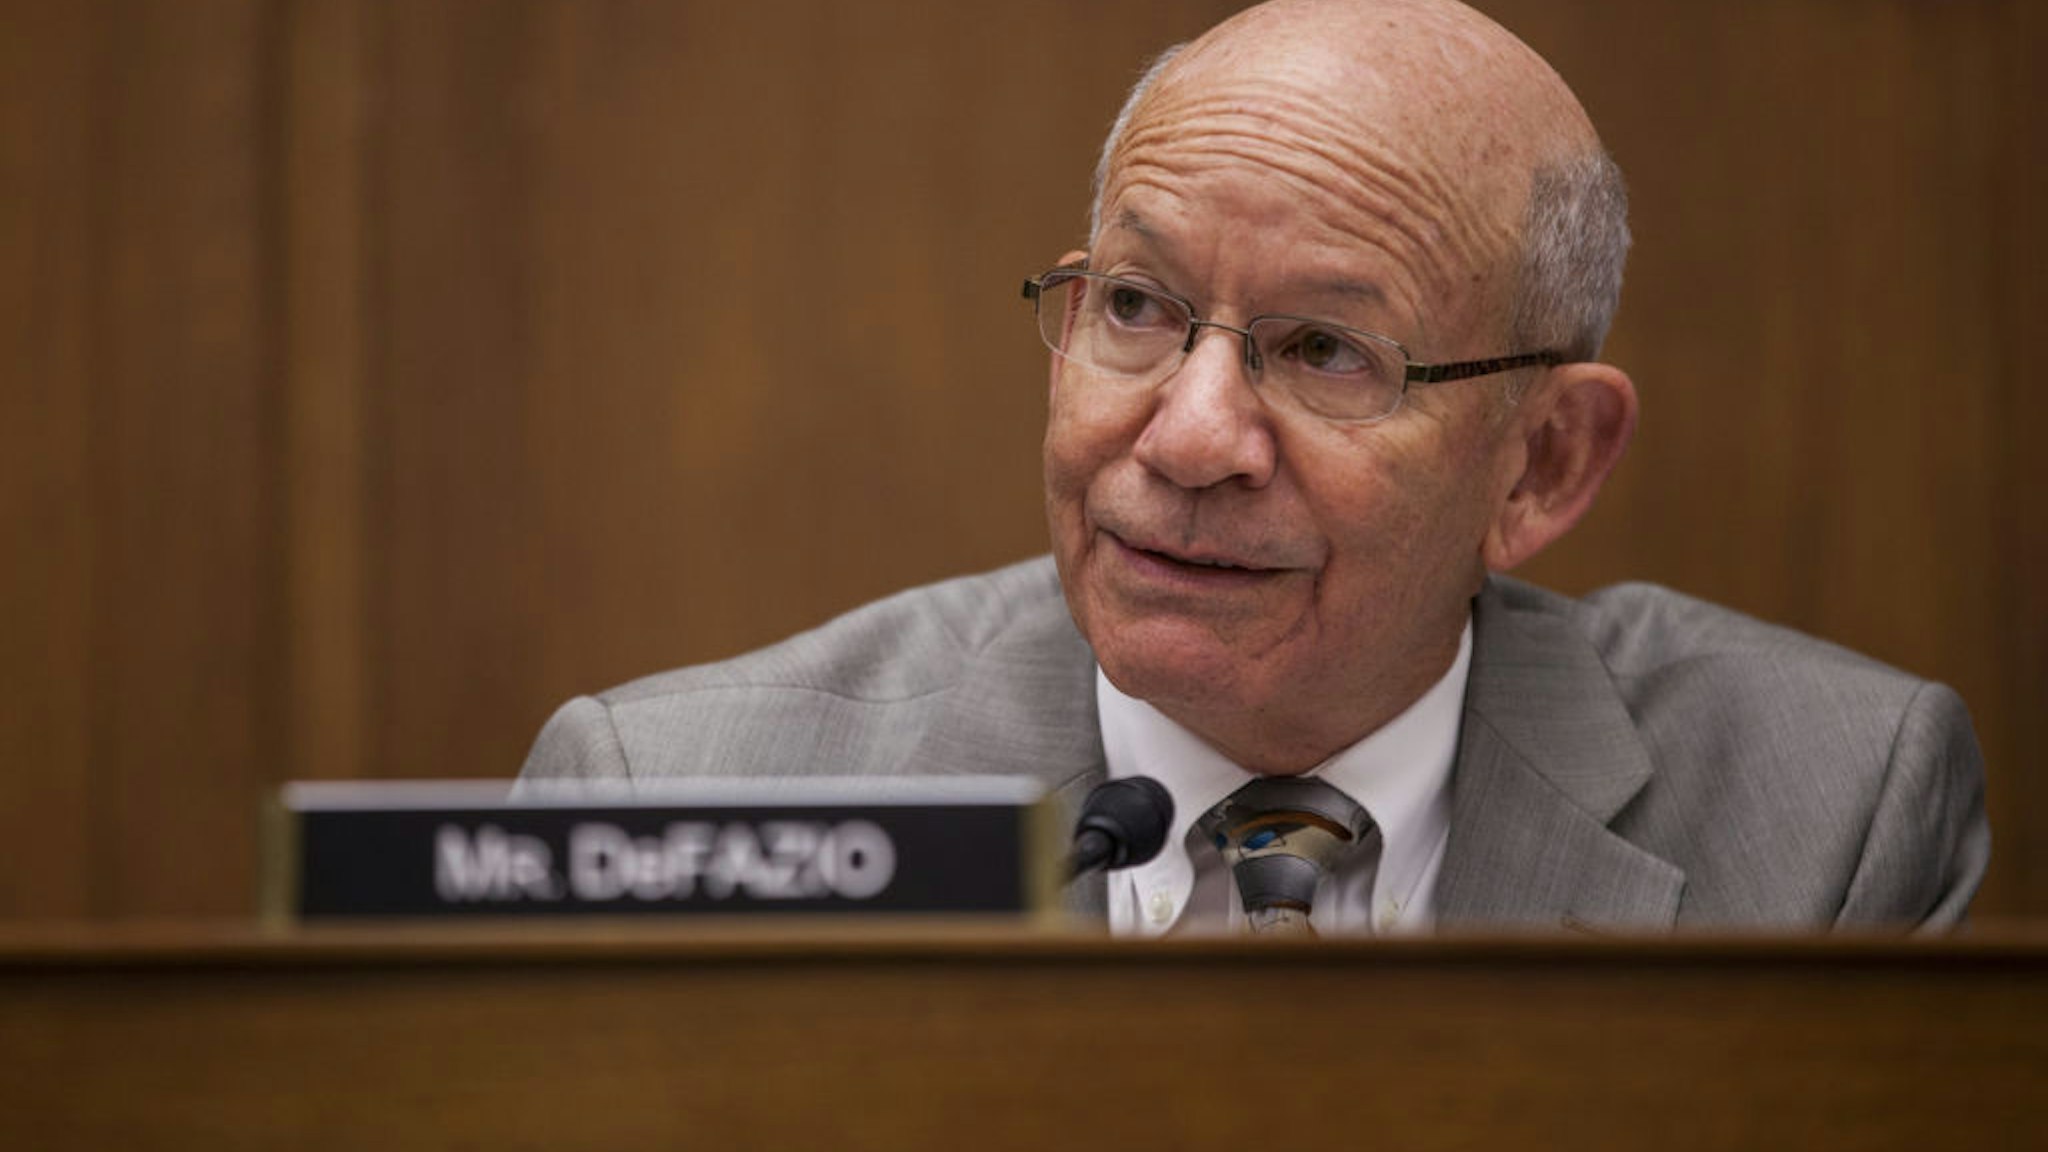 Representative Peter DeFazio, a Democrat from Oregon and ranking member of the House Transportation and Infrastructure Committee